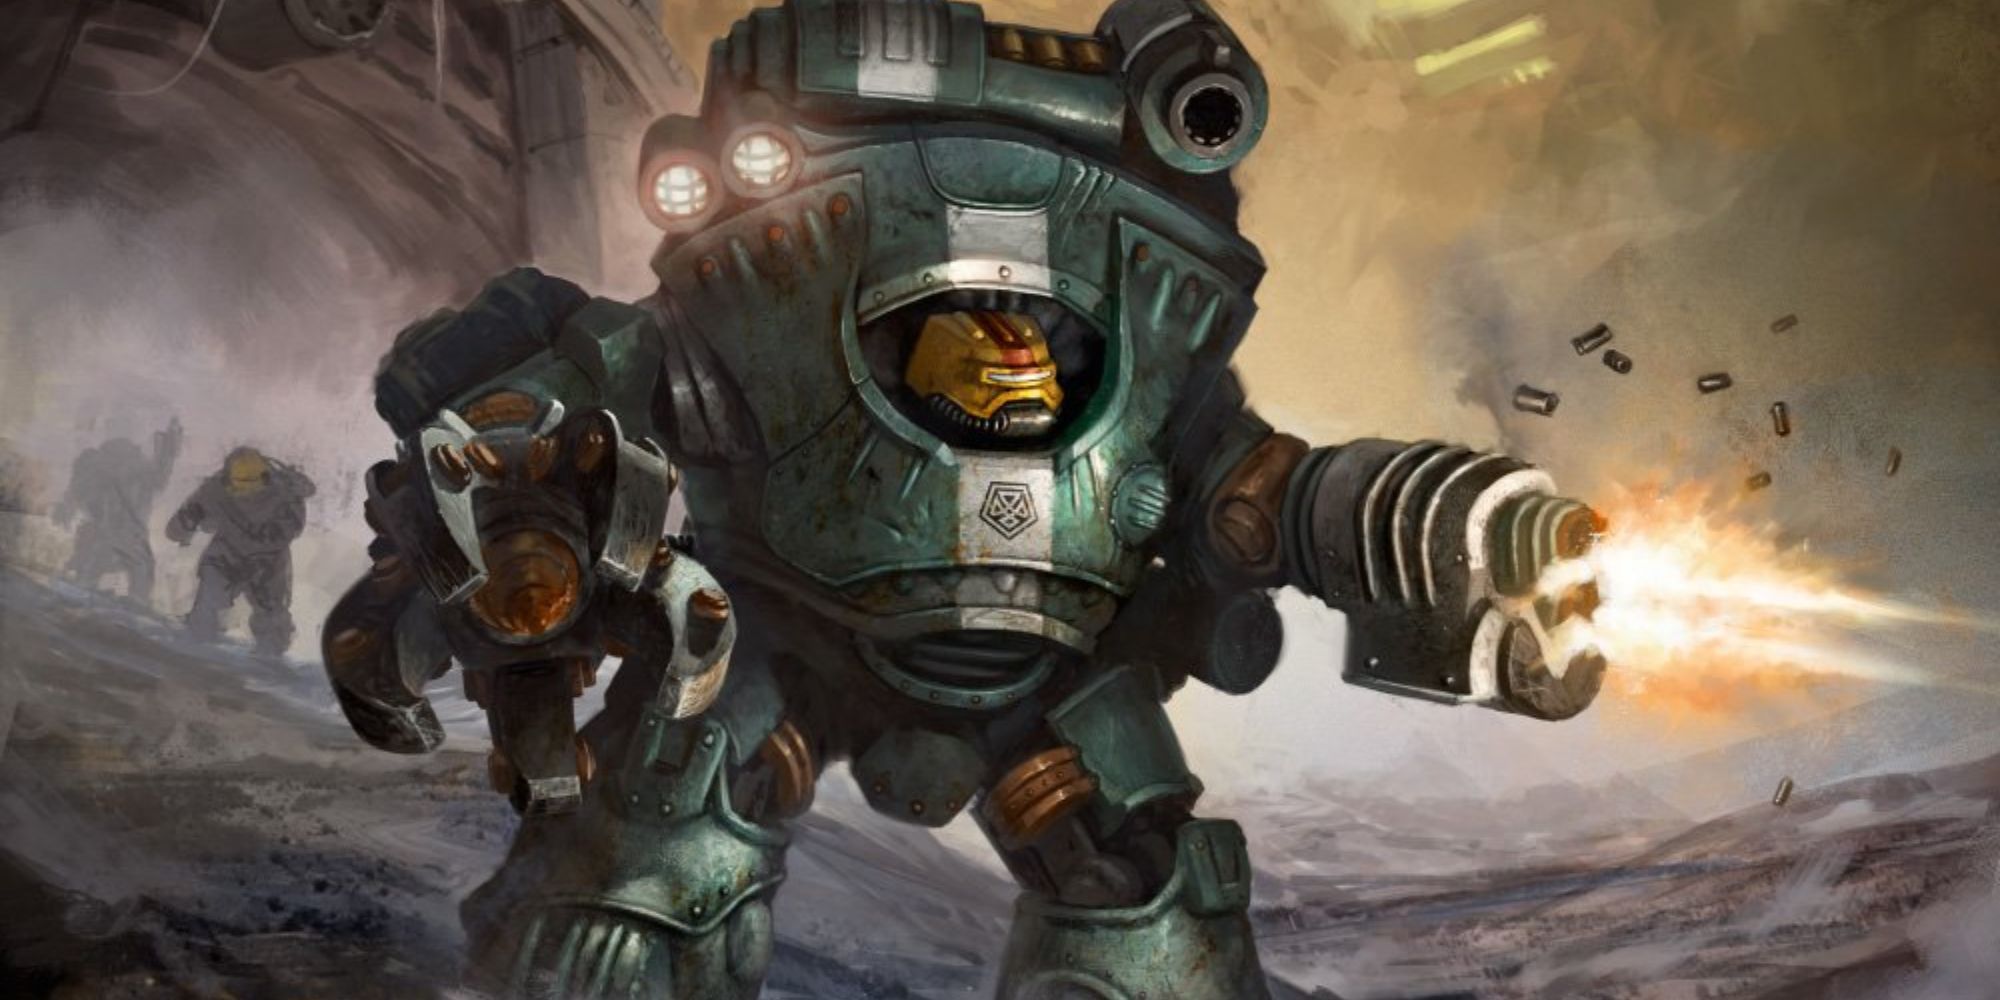 The Leagues of Votann: A History of the Squats (Warhammer 40K Lore) 